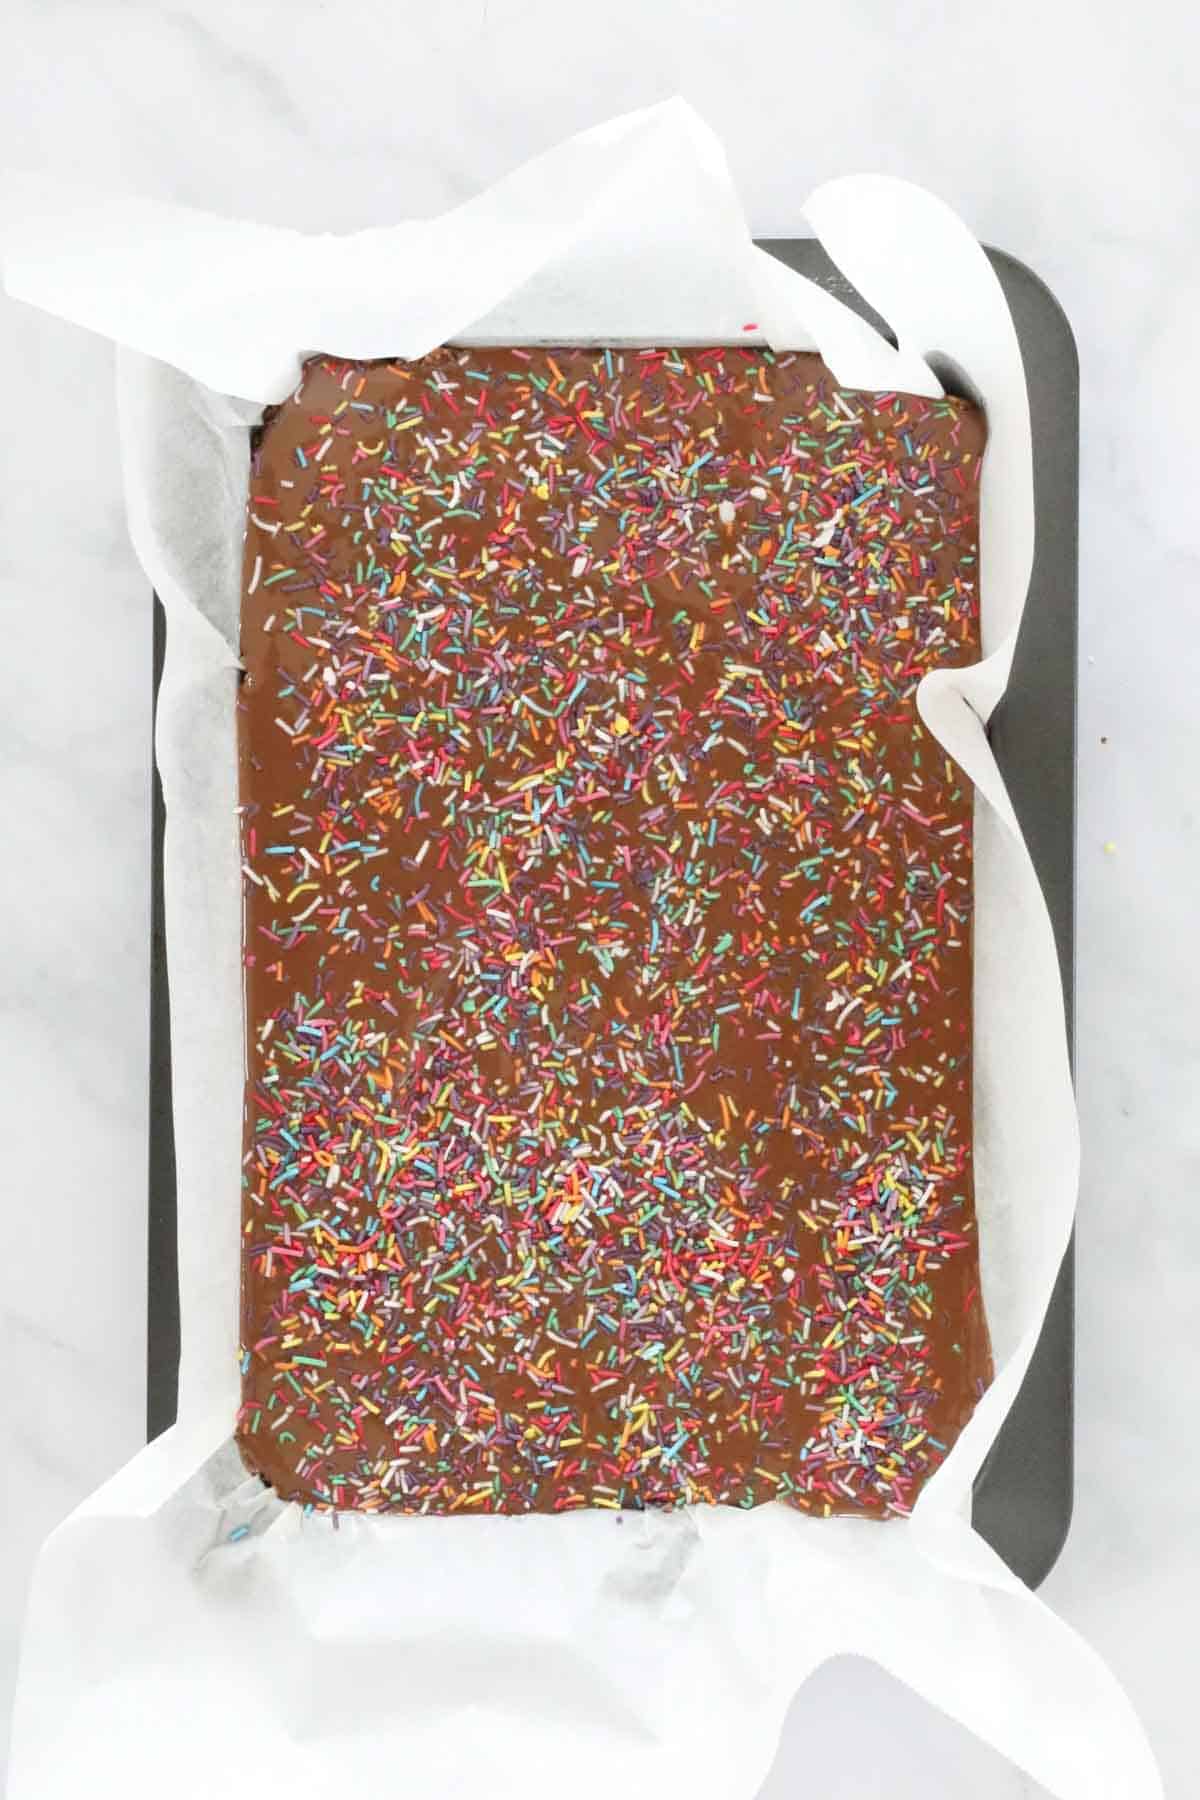 Chocolate slice with sprinkles in a tin.